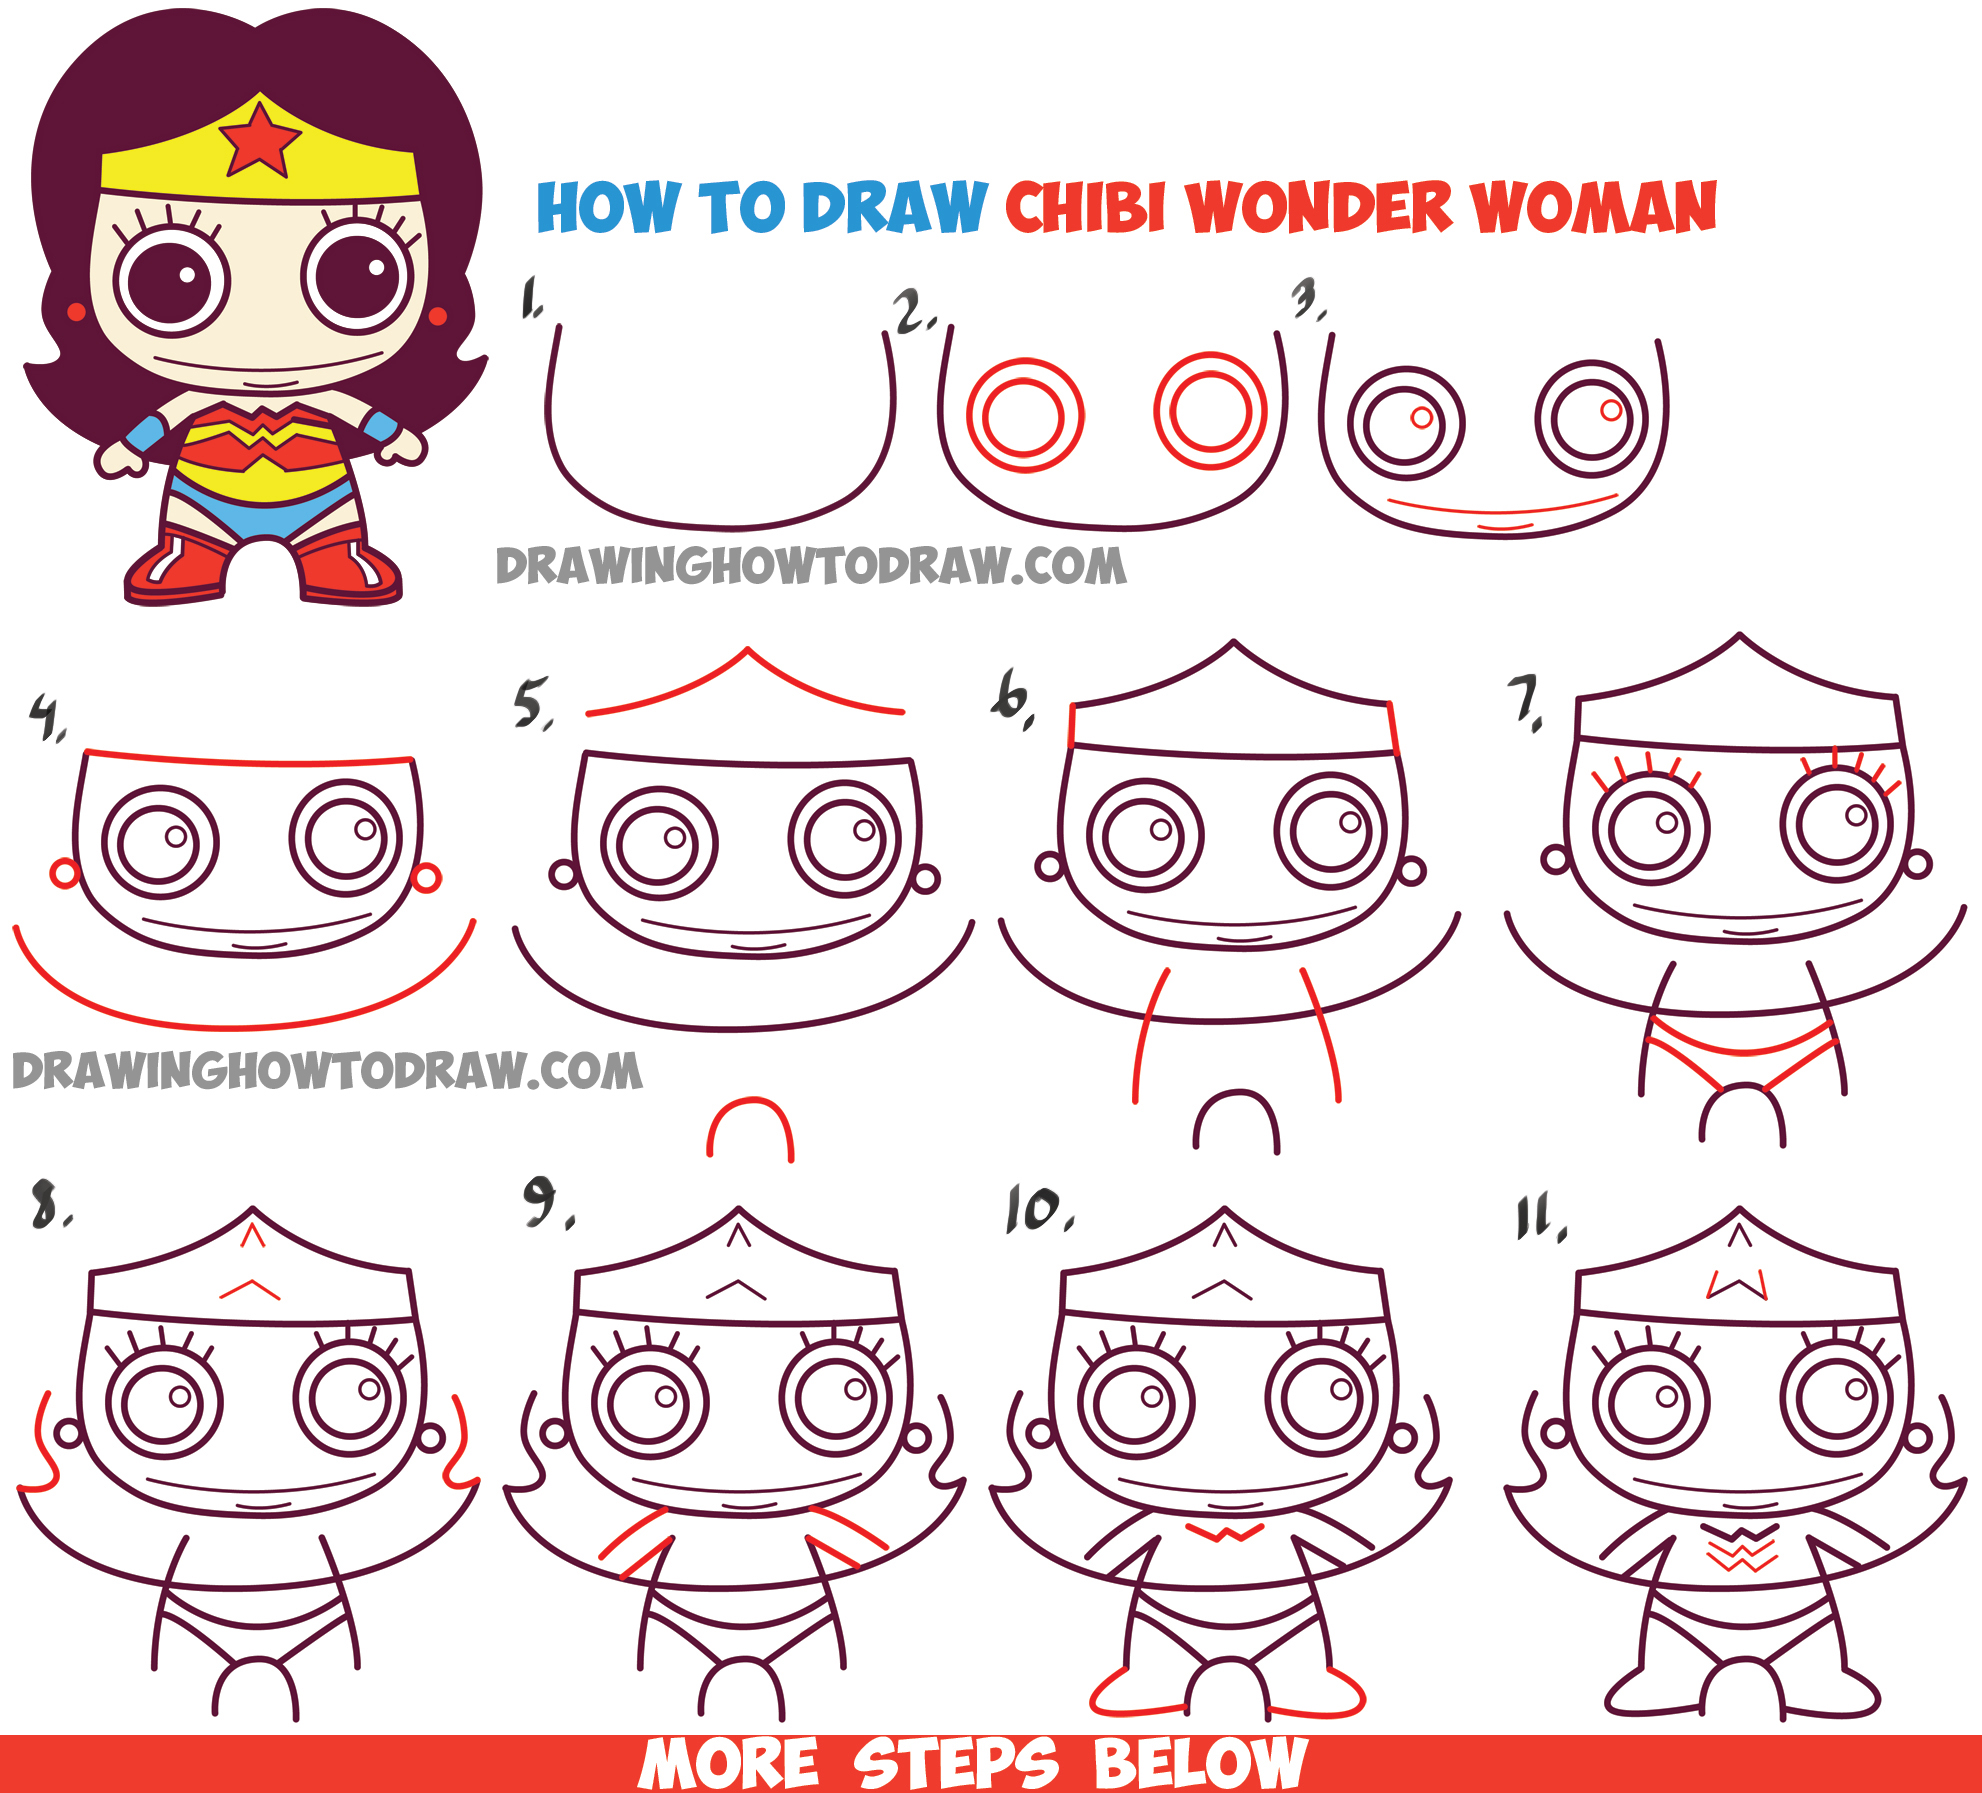 How to Draw Cute Chibi Wonder Woman from DC Comics in Easy Step by Step